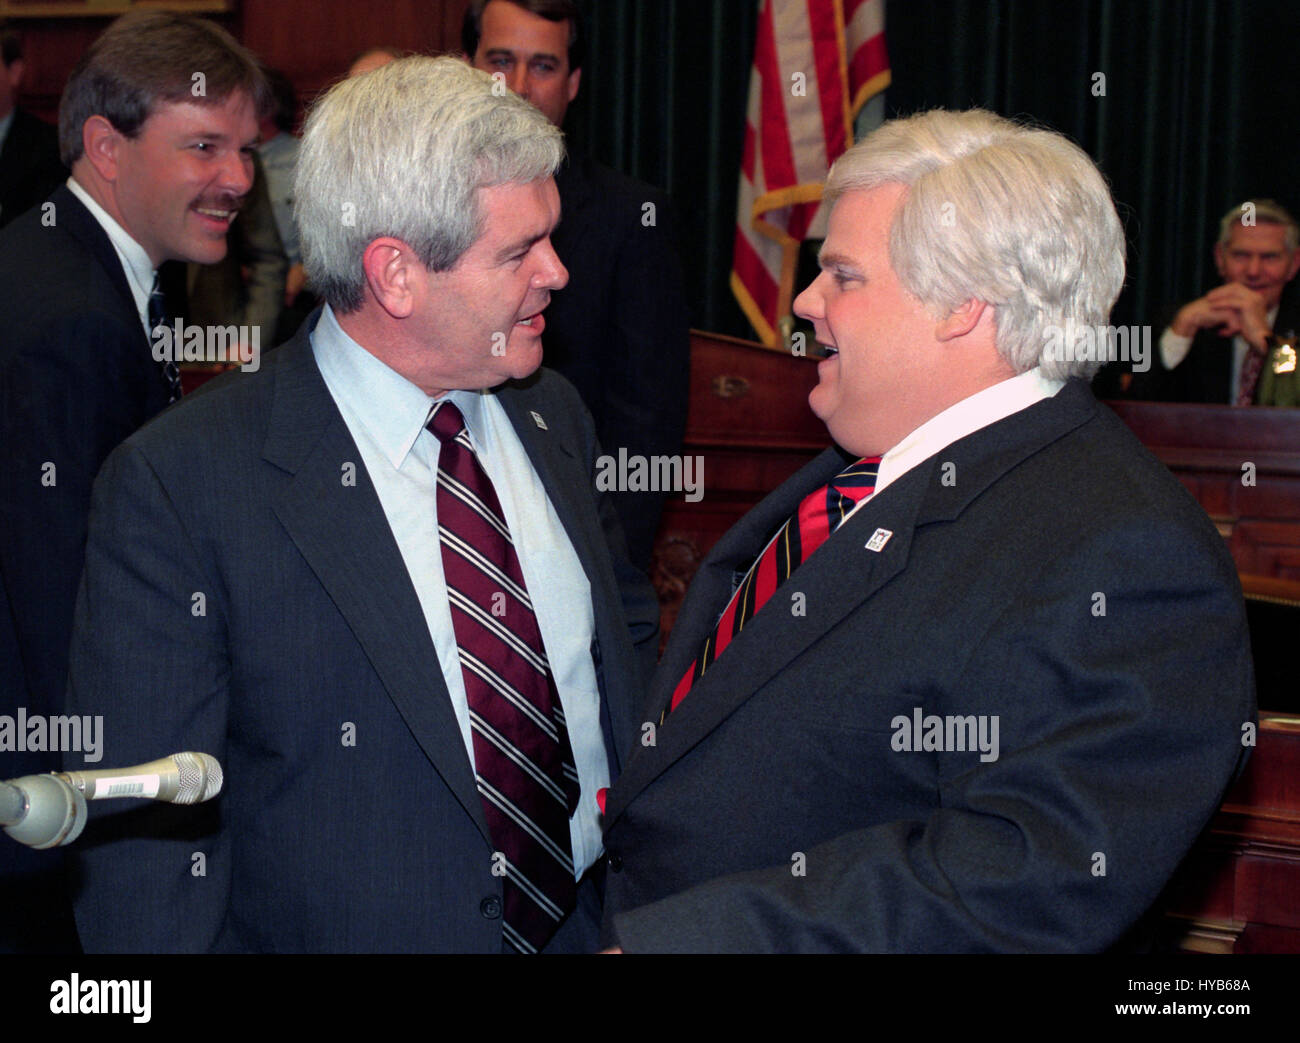 U.S House Speaker Newt Gingrich, left, meets comedian Chris Farley who impersonates Gingrich on the television show Saturday Night Live during an even on Capitol Hill April 4, 1995 in Washington, DC. Stock Photo